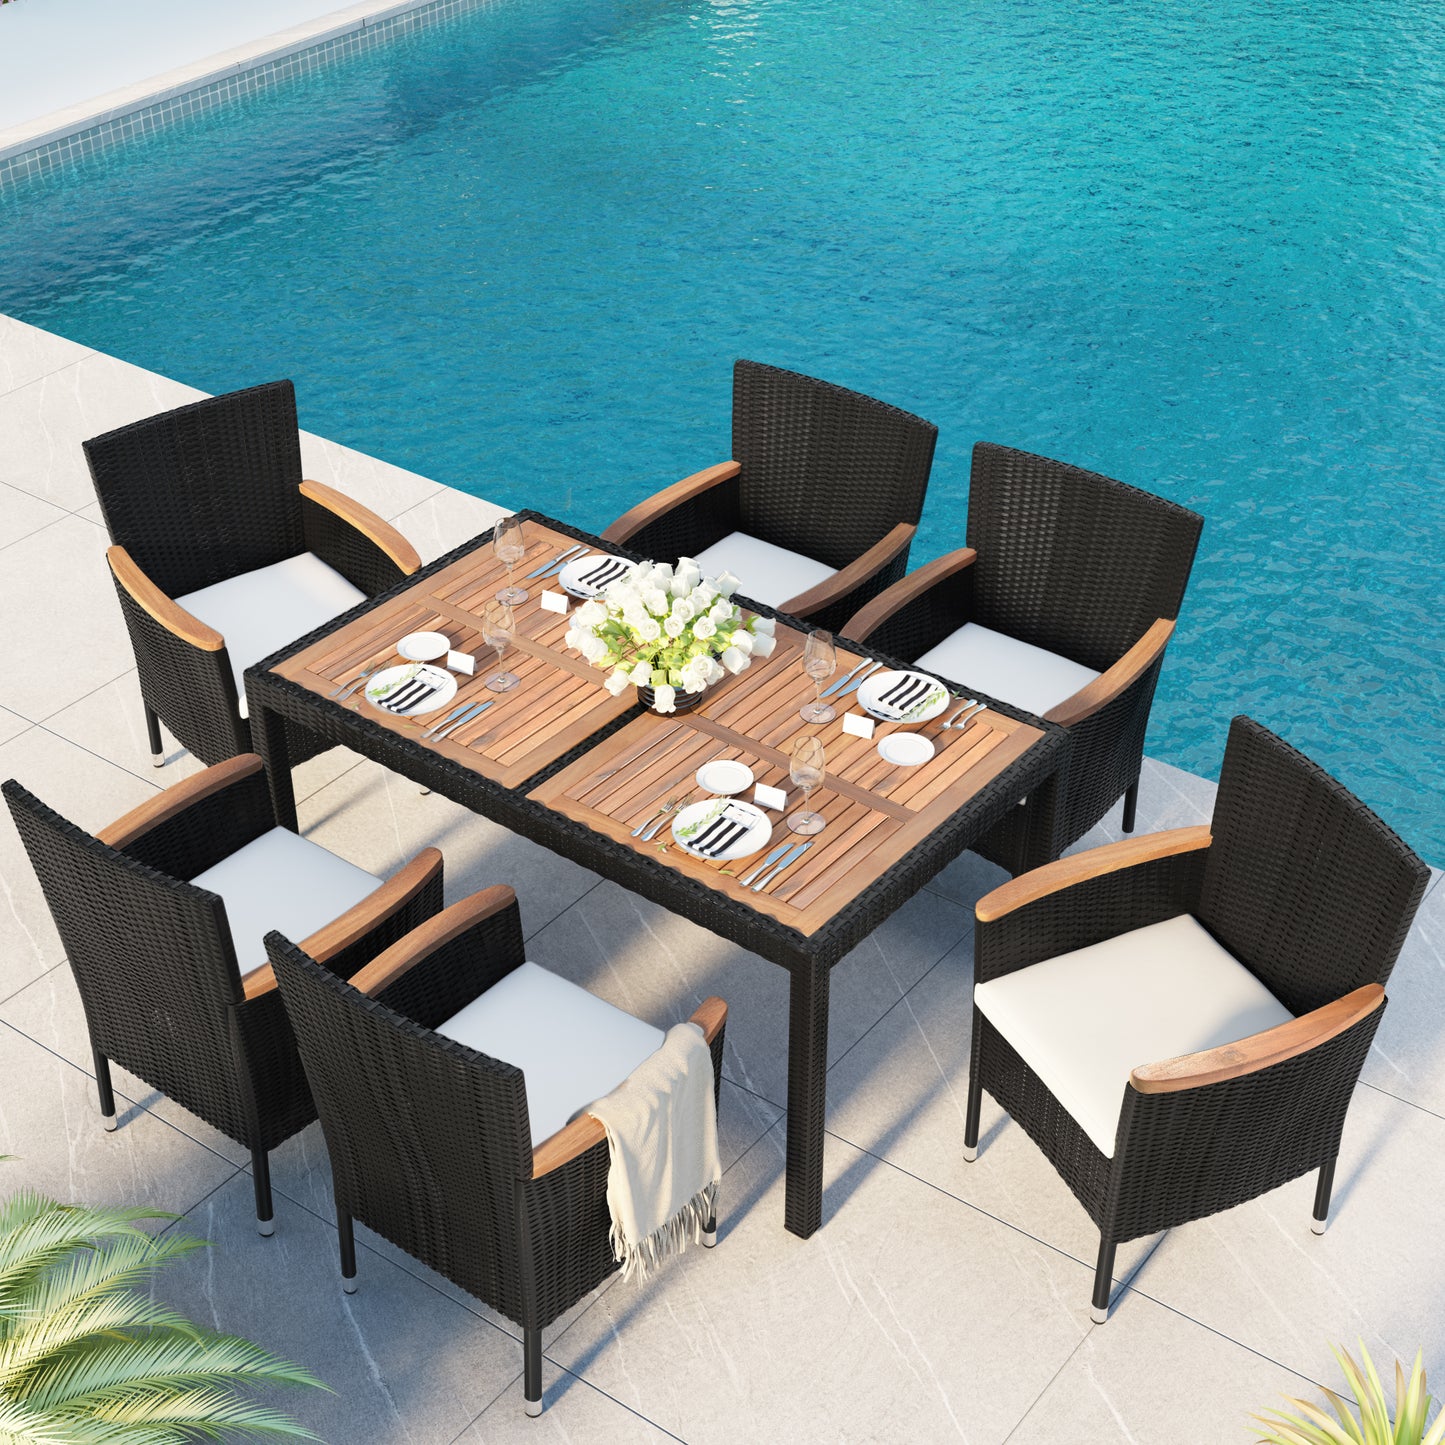 SYNGAR 7 Piece Outdoor Dining Set, All Weather PE Wicker Dining Table Set, Patio Rattan Furniture Set with Rectangular Acacia Wood Table and 6 Cushioned Chairs, for Backyard, Poolside, Balcony, D7335